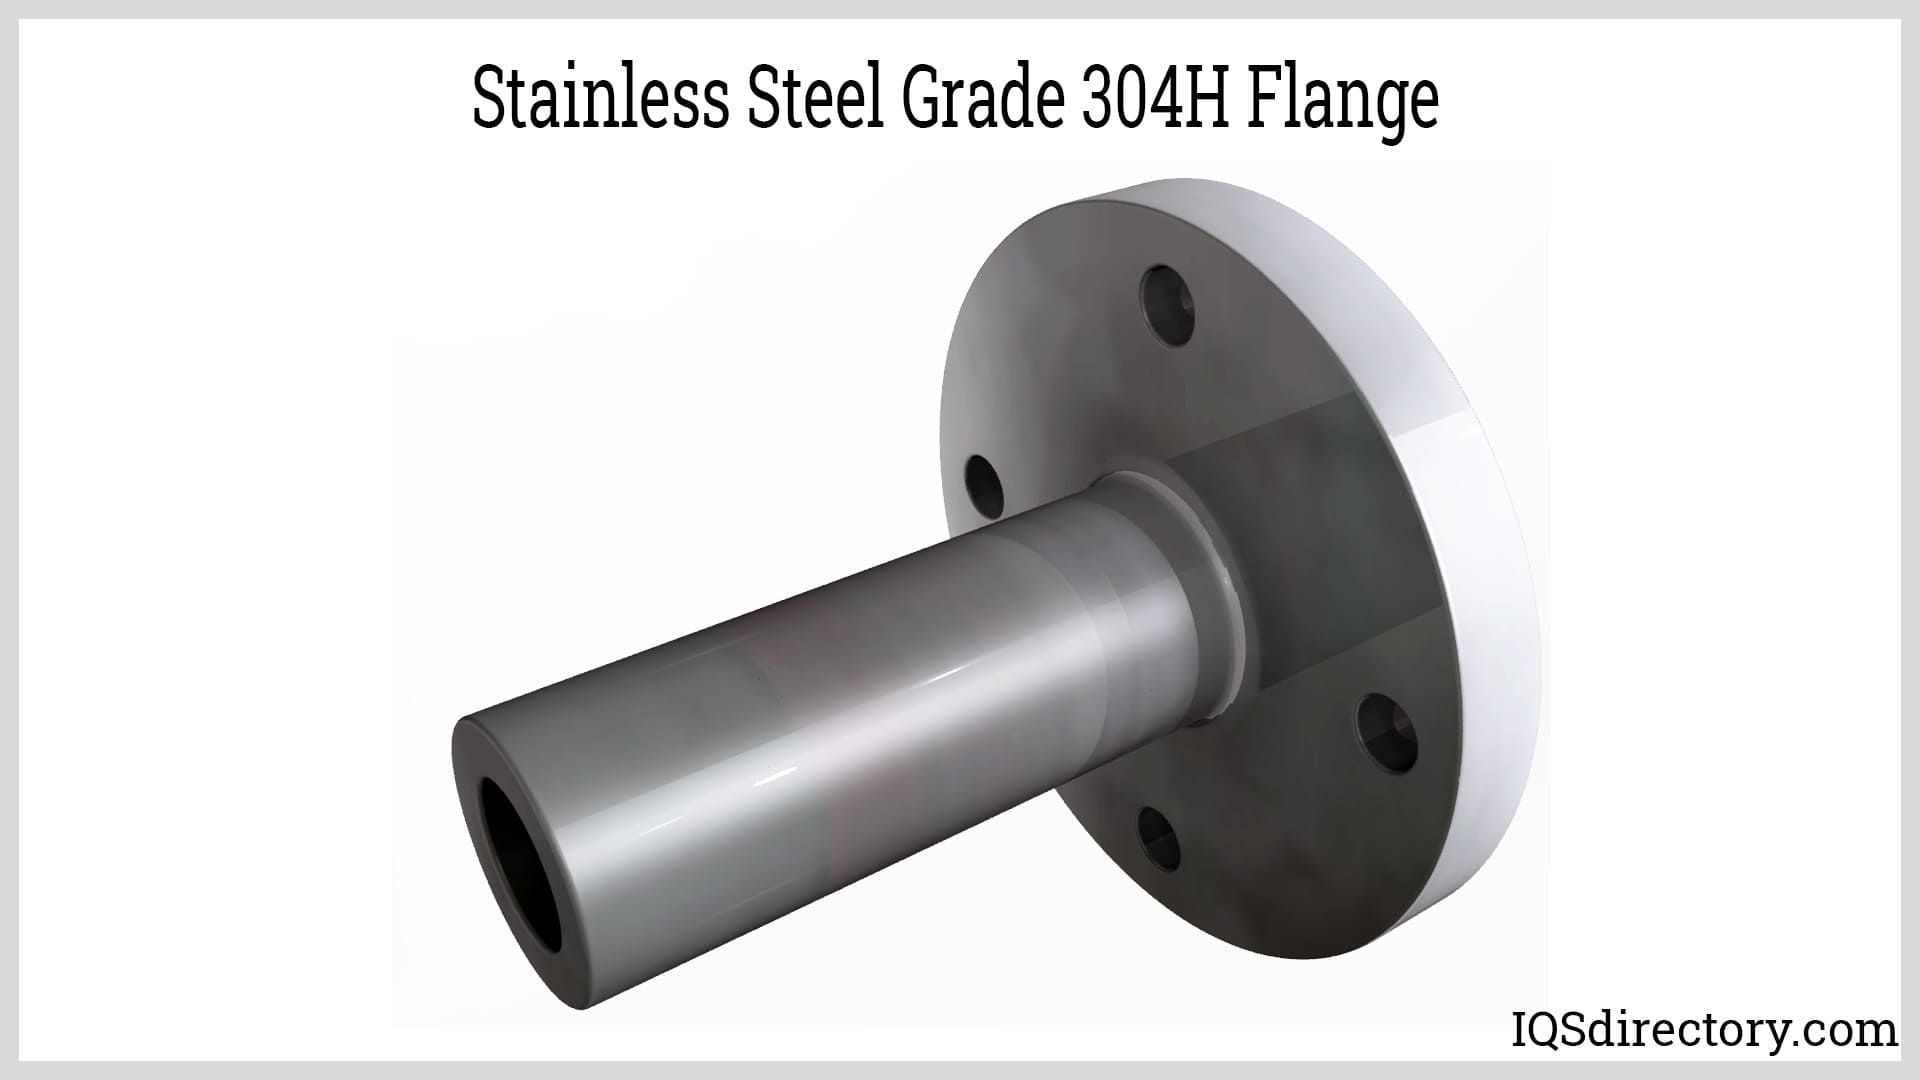 Stainless Steel Grade 304H Flange